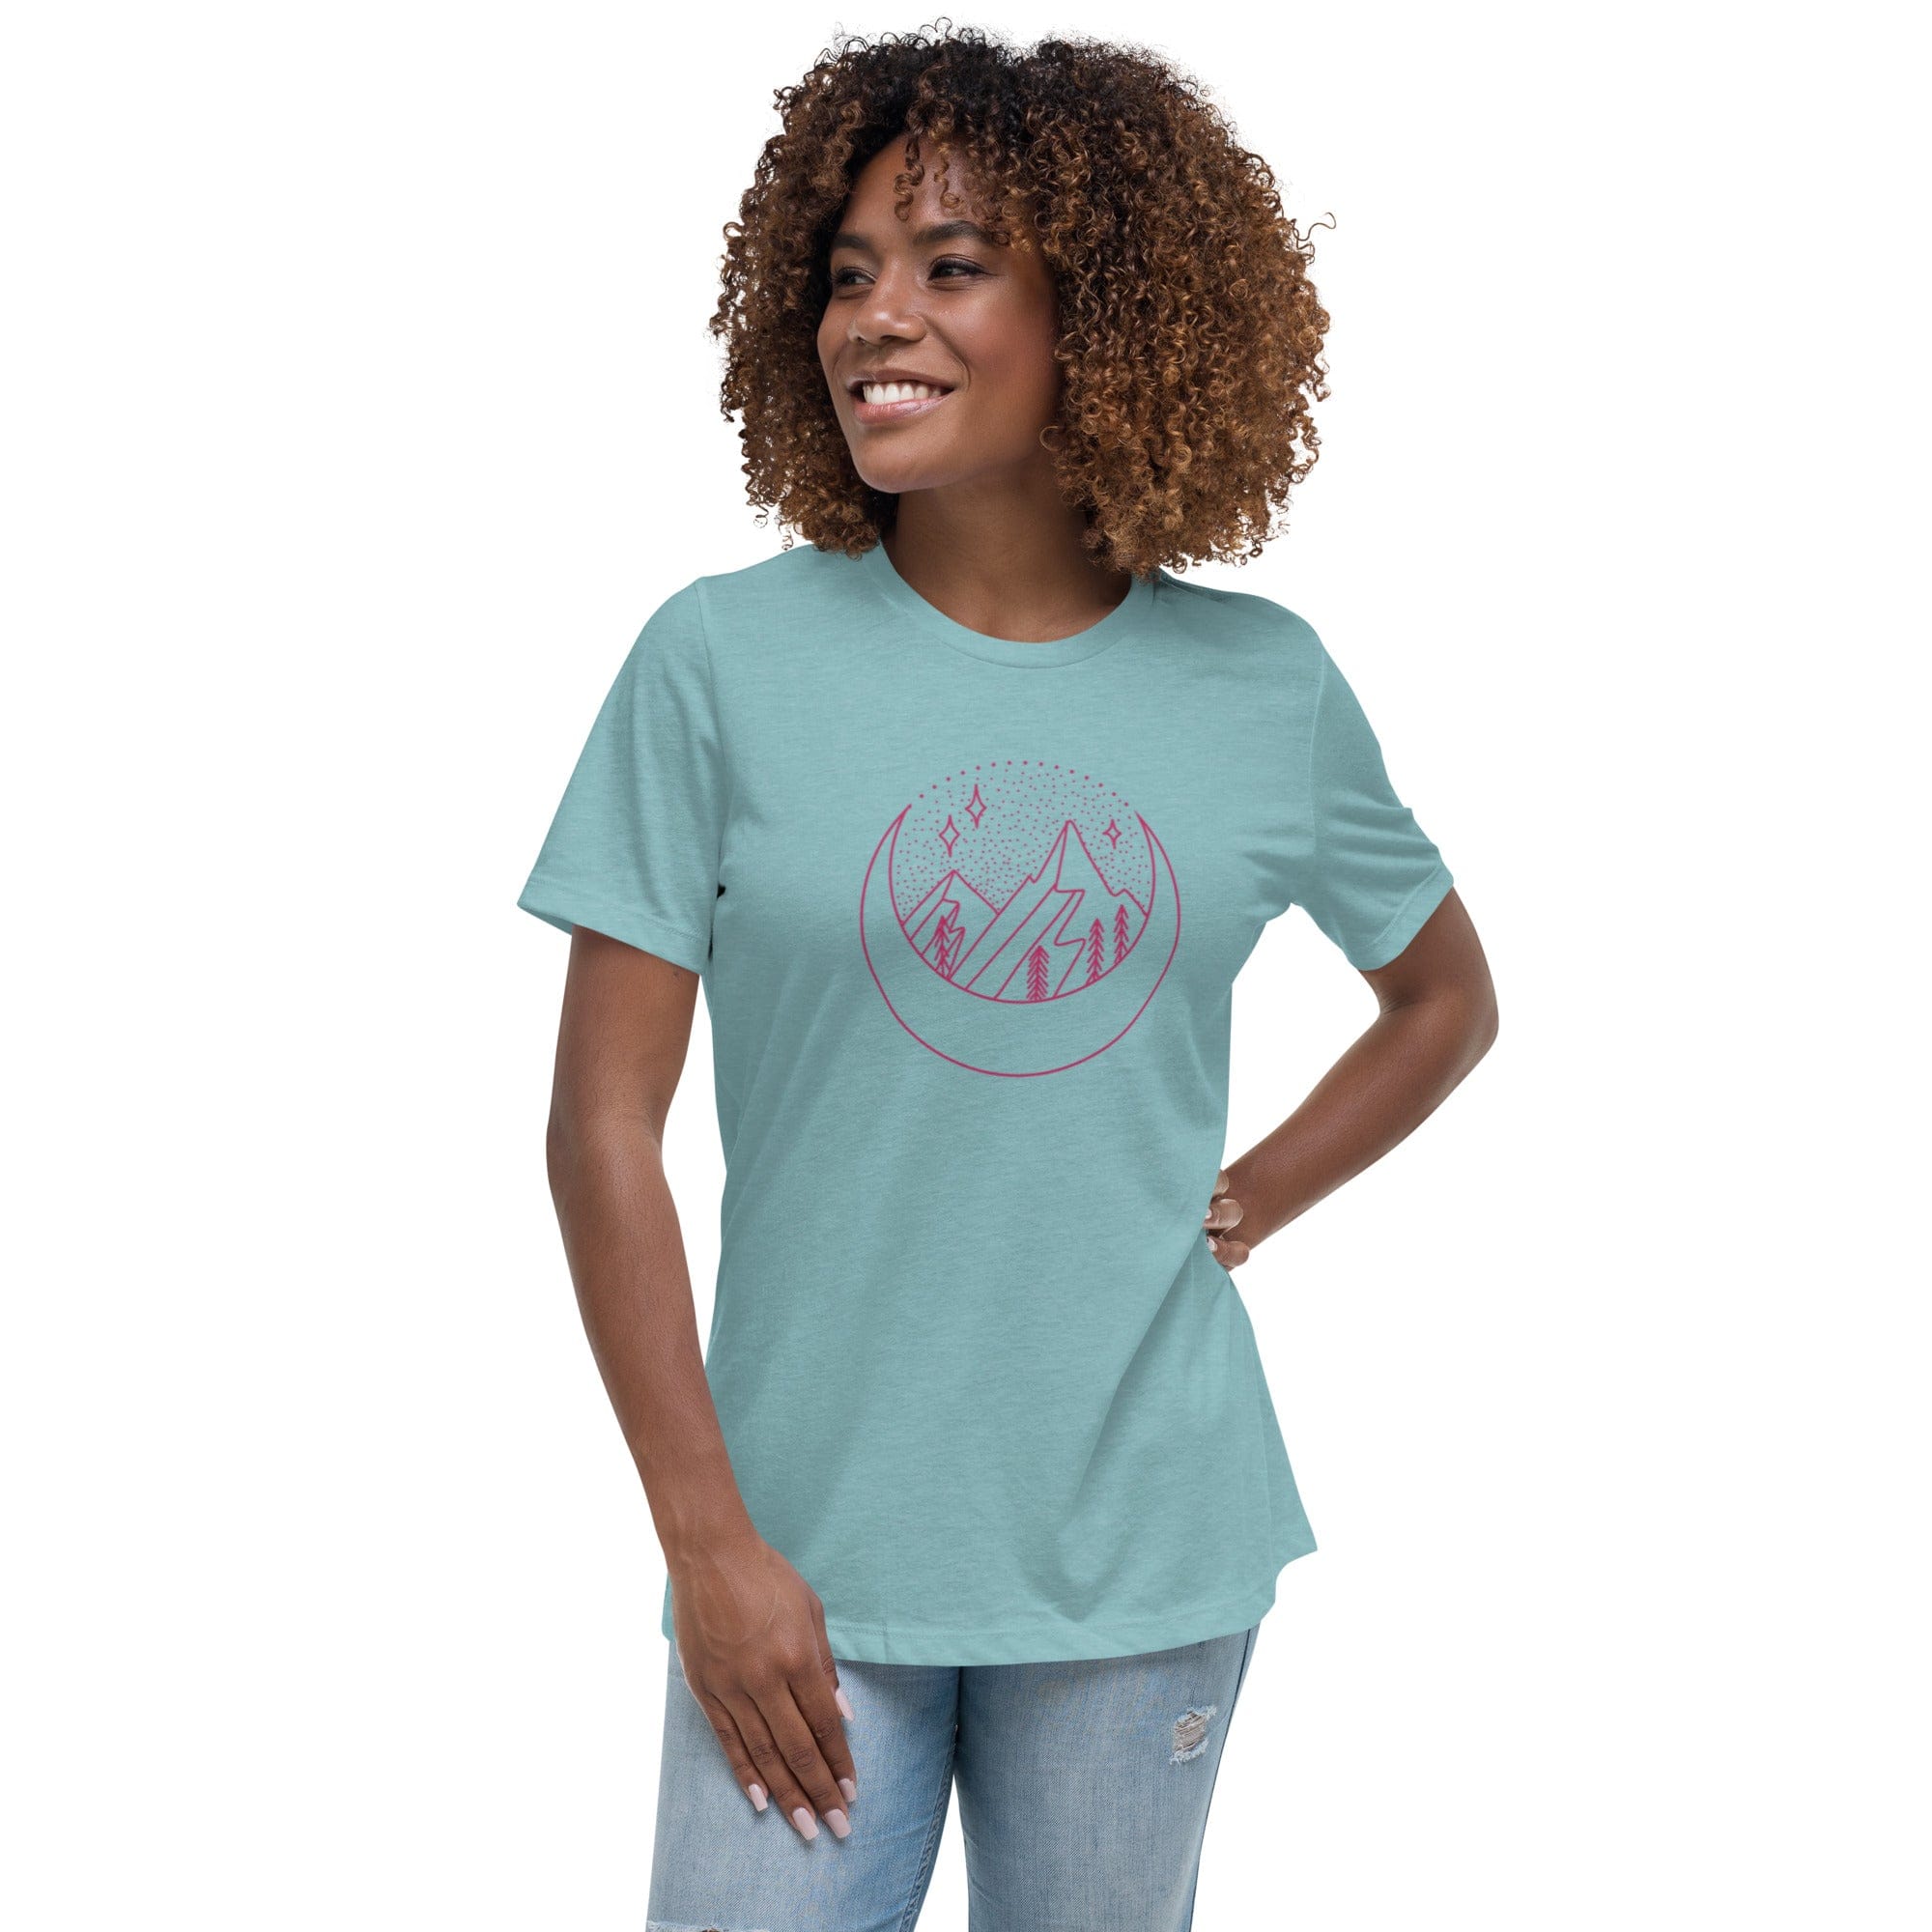 Spruced Roost Heather Blue Lagoon / S Adventure Awaits Crescent Colors Stars Relaxed T-Shirt - S-3XL